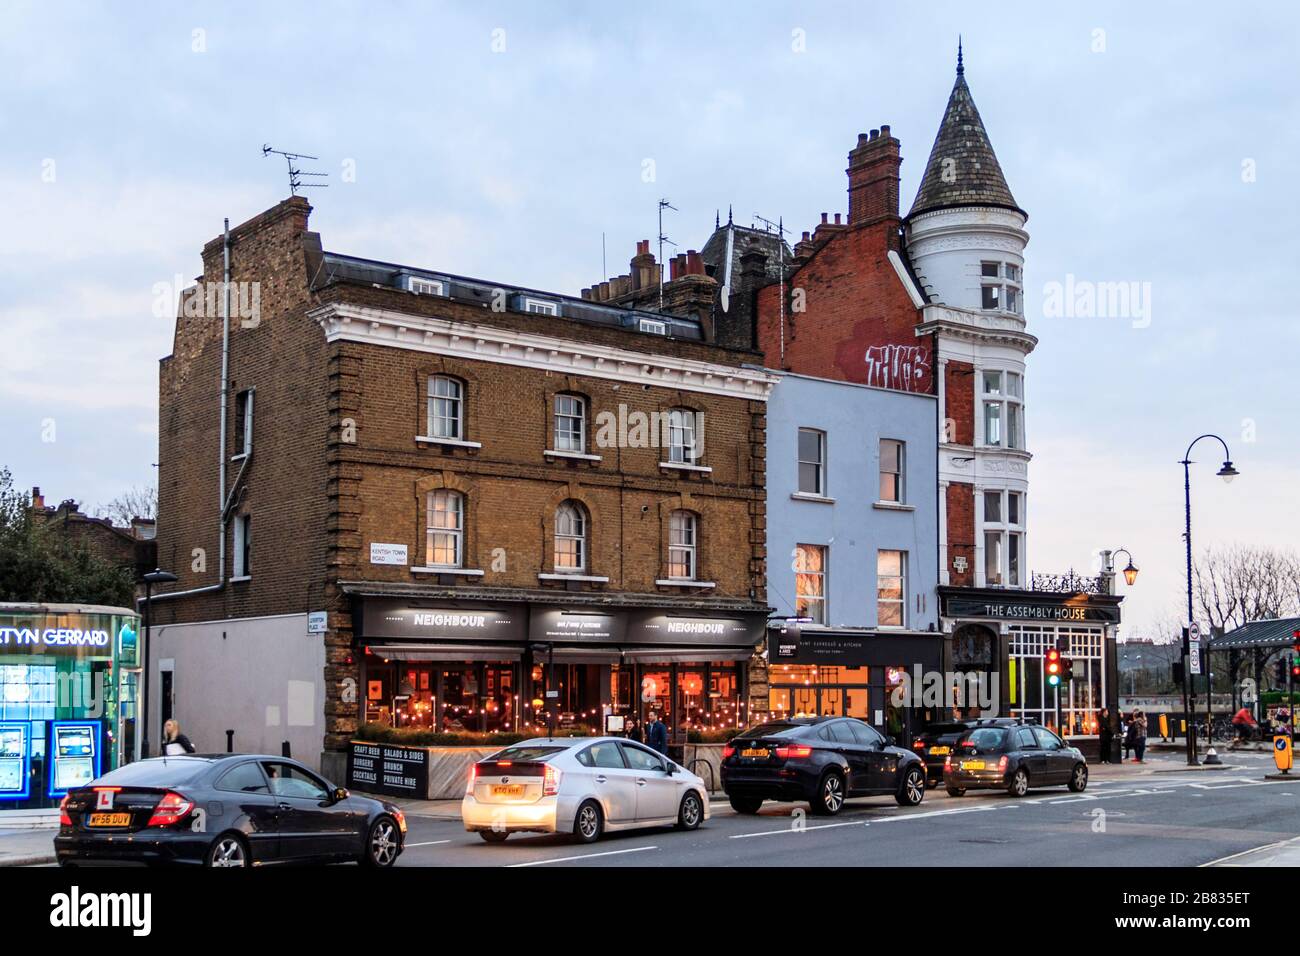 The Assembly House public house and Neighbour Bar and Restaurant in Kentish Town, London, UK Stock Photo